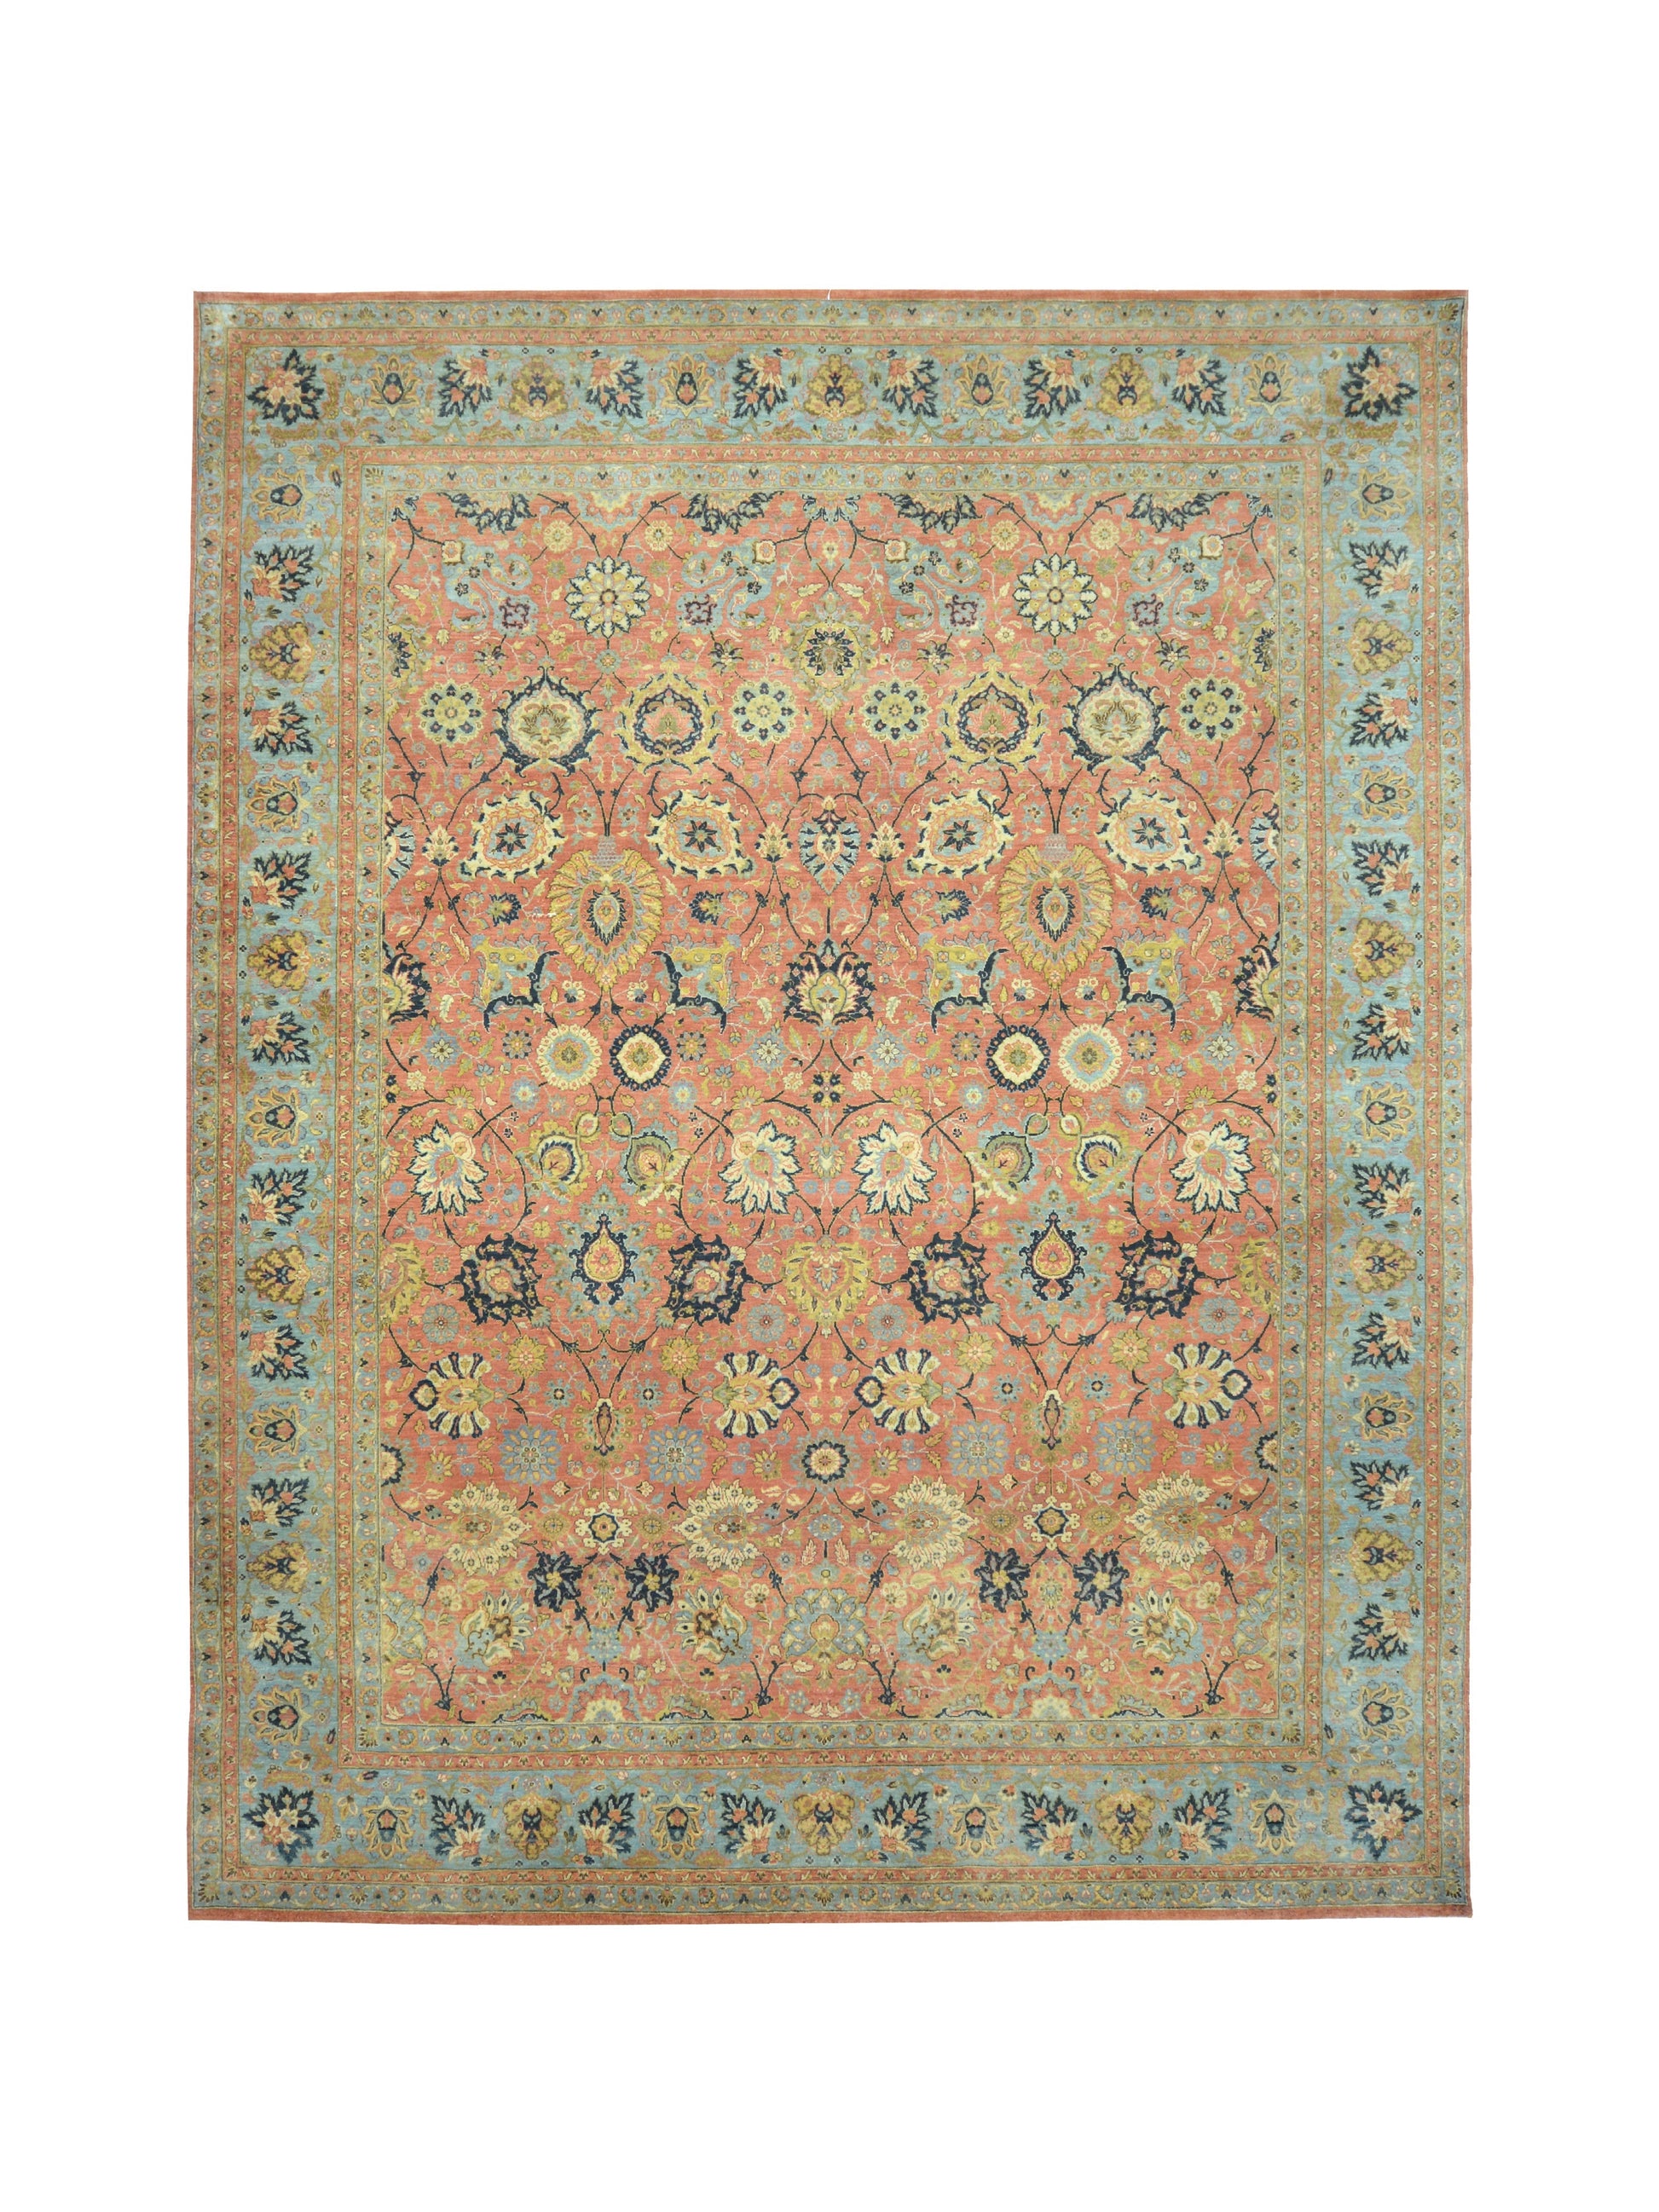 Get trendy with Lamani Rust, Light Blue and Multy Luxury Traditional  Pure Wool Handknotted Area Rug - Traditional Rugs available at Jaipur Oriental Rugs. Grab yours for $5115.00 today!